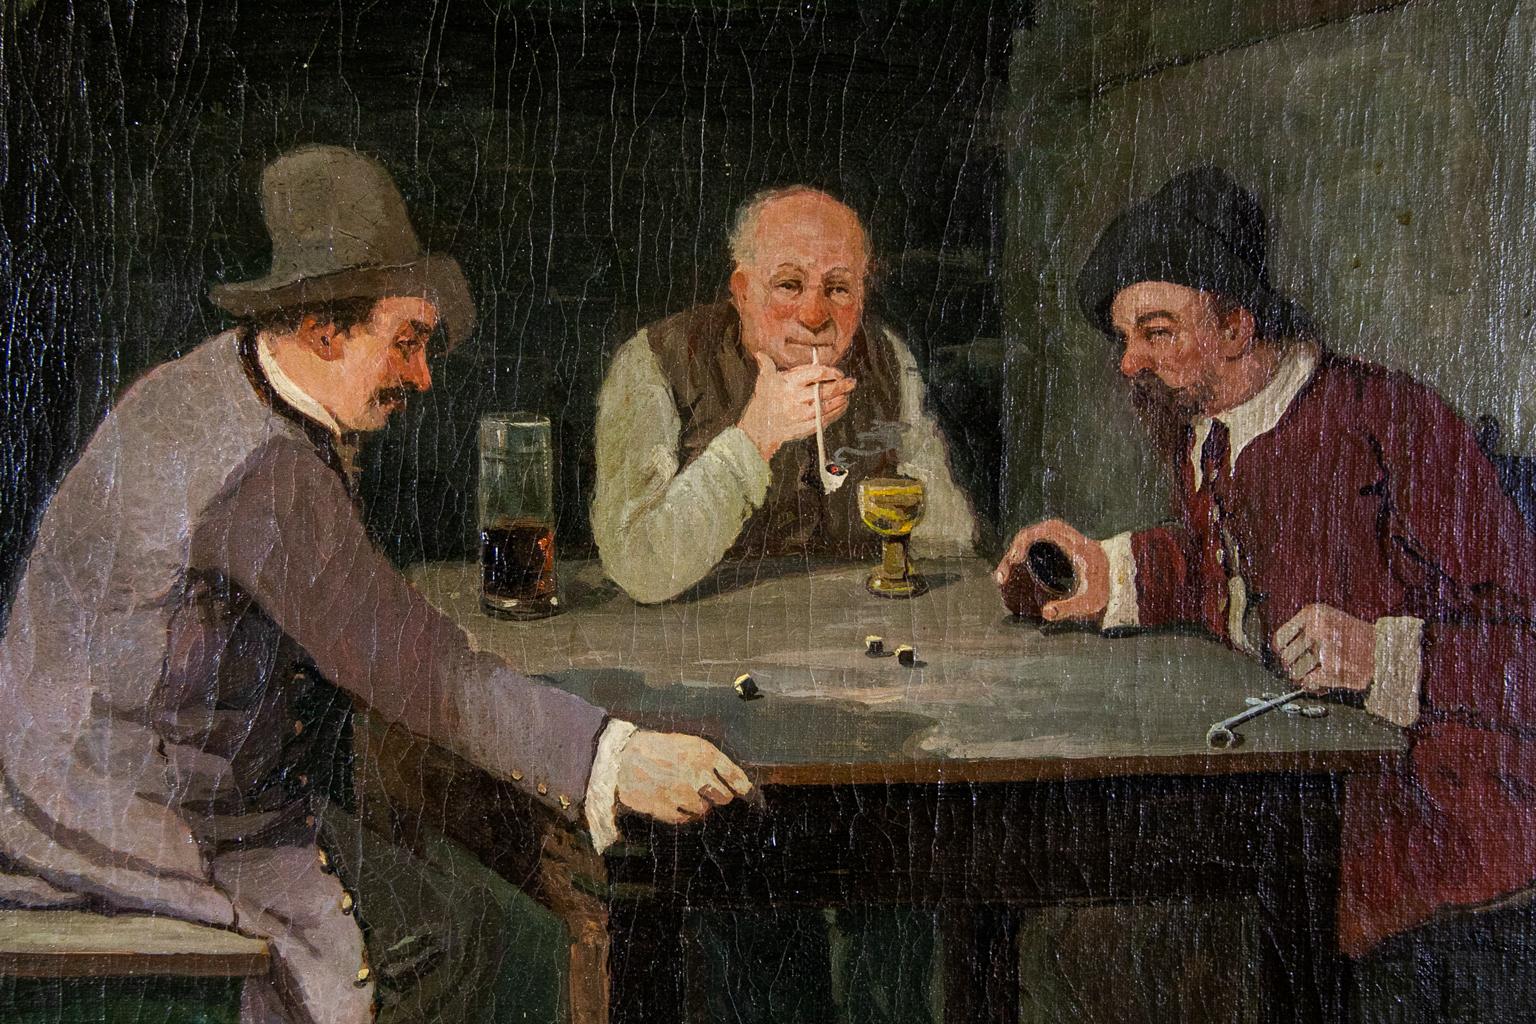 19th century tavern scene oil painting by L. Wittkowski, Berlin, the men playing dice, drinking ale, and smoking clay pipes.